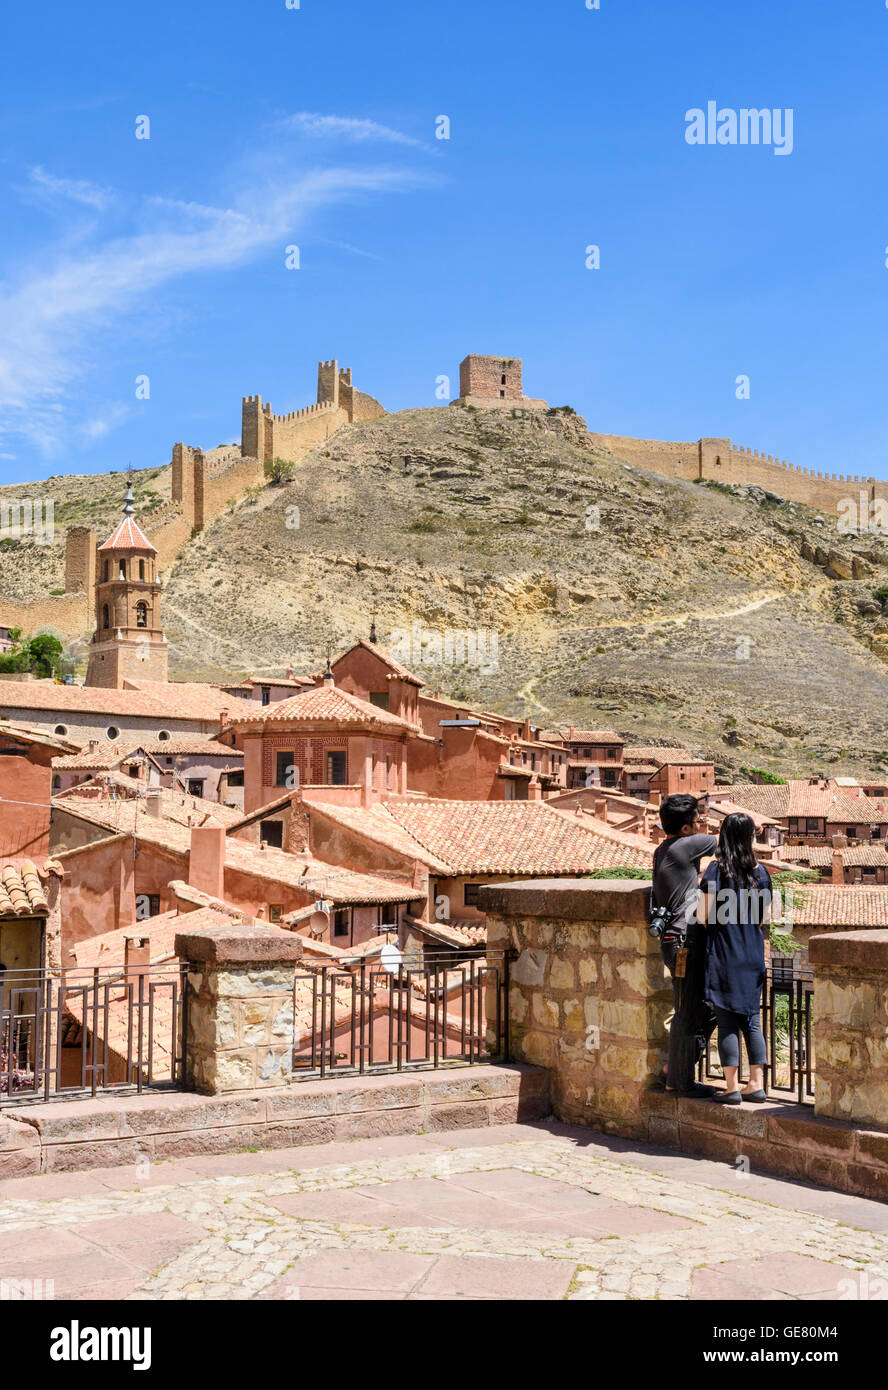 Tourists looking at the view from the Medieval walled town of Albarracin, Teruel, Aragon, Spain Stock Photo